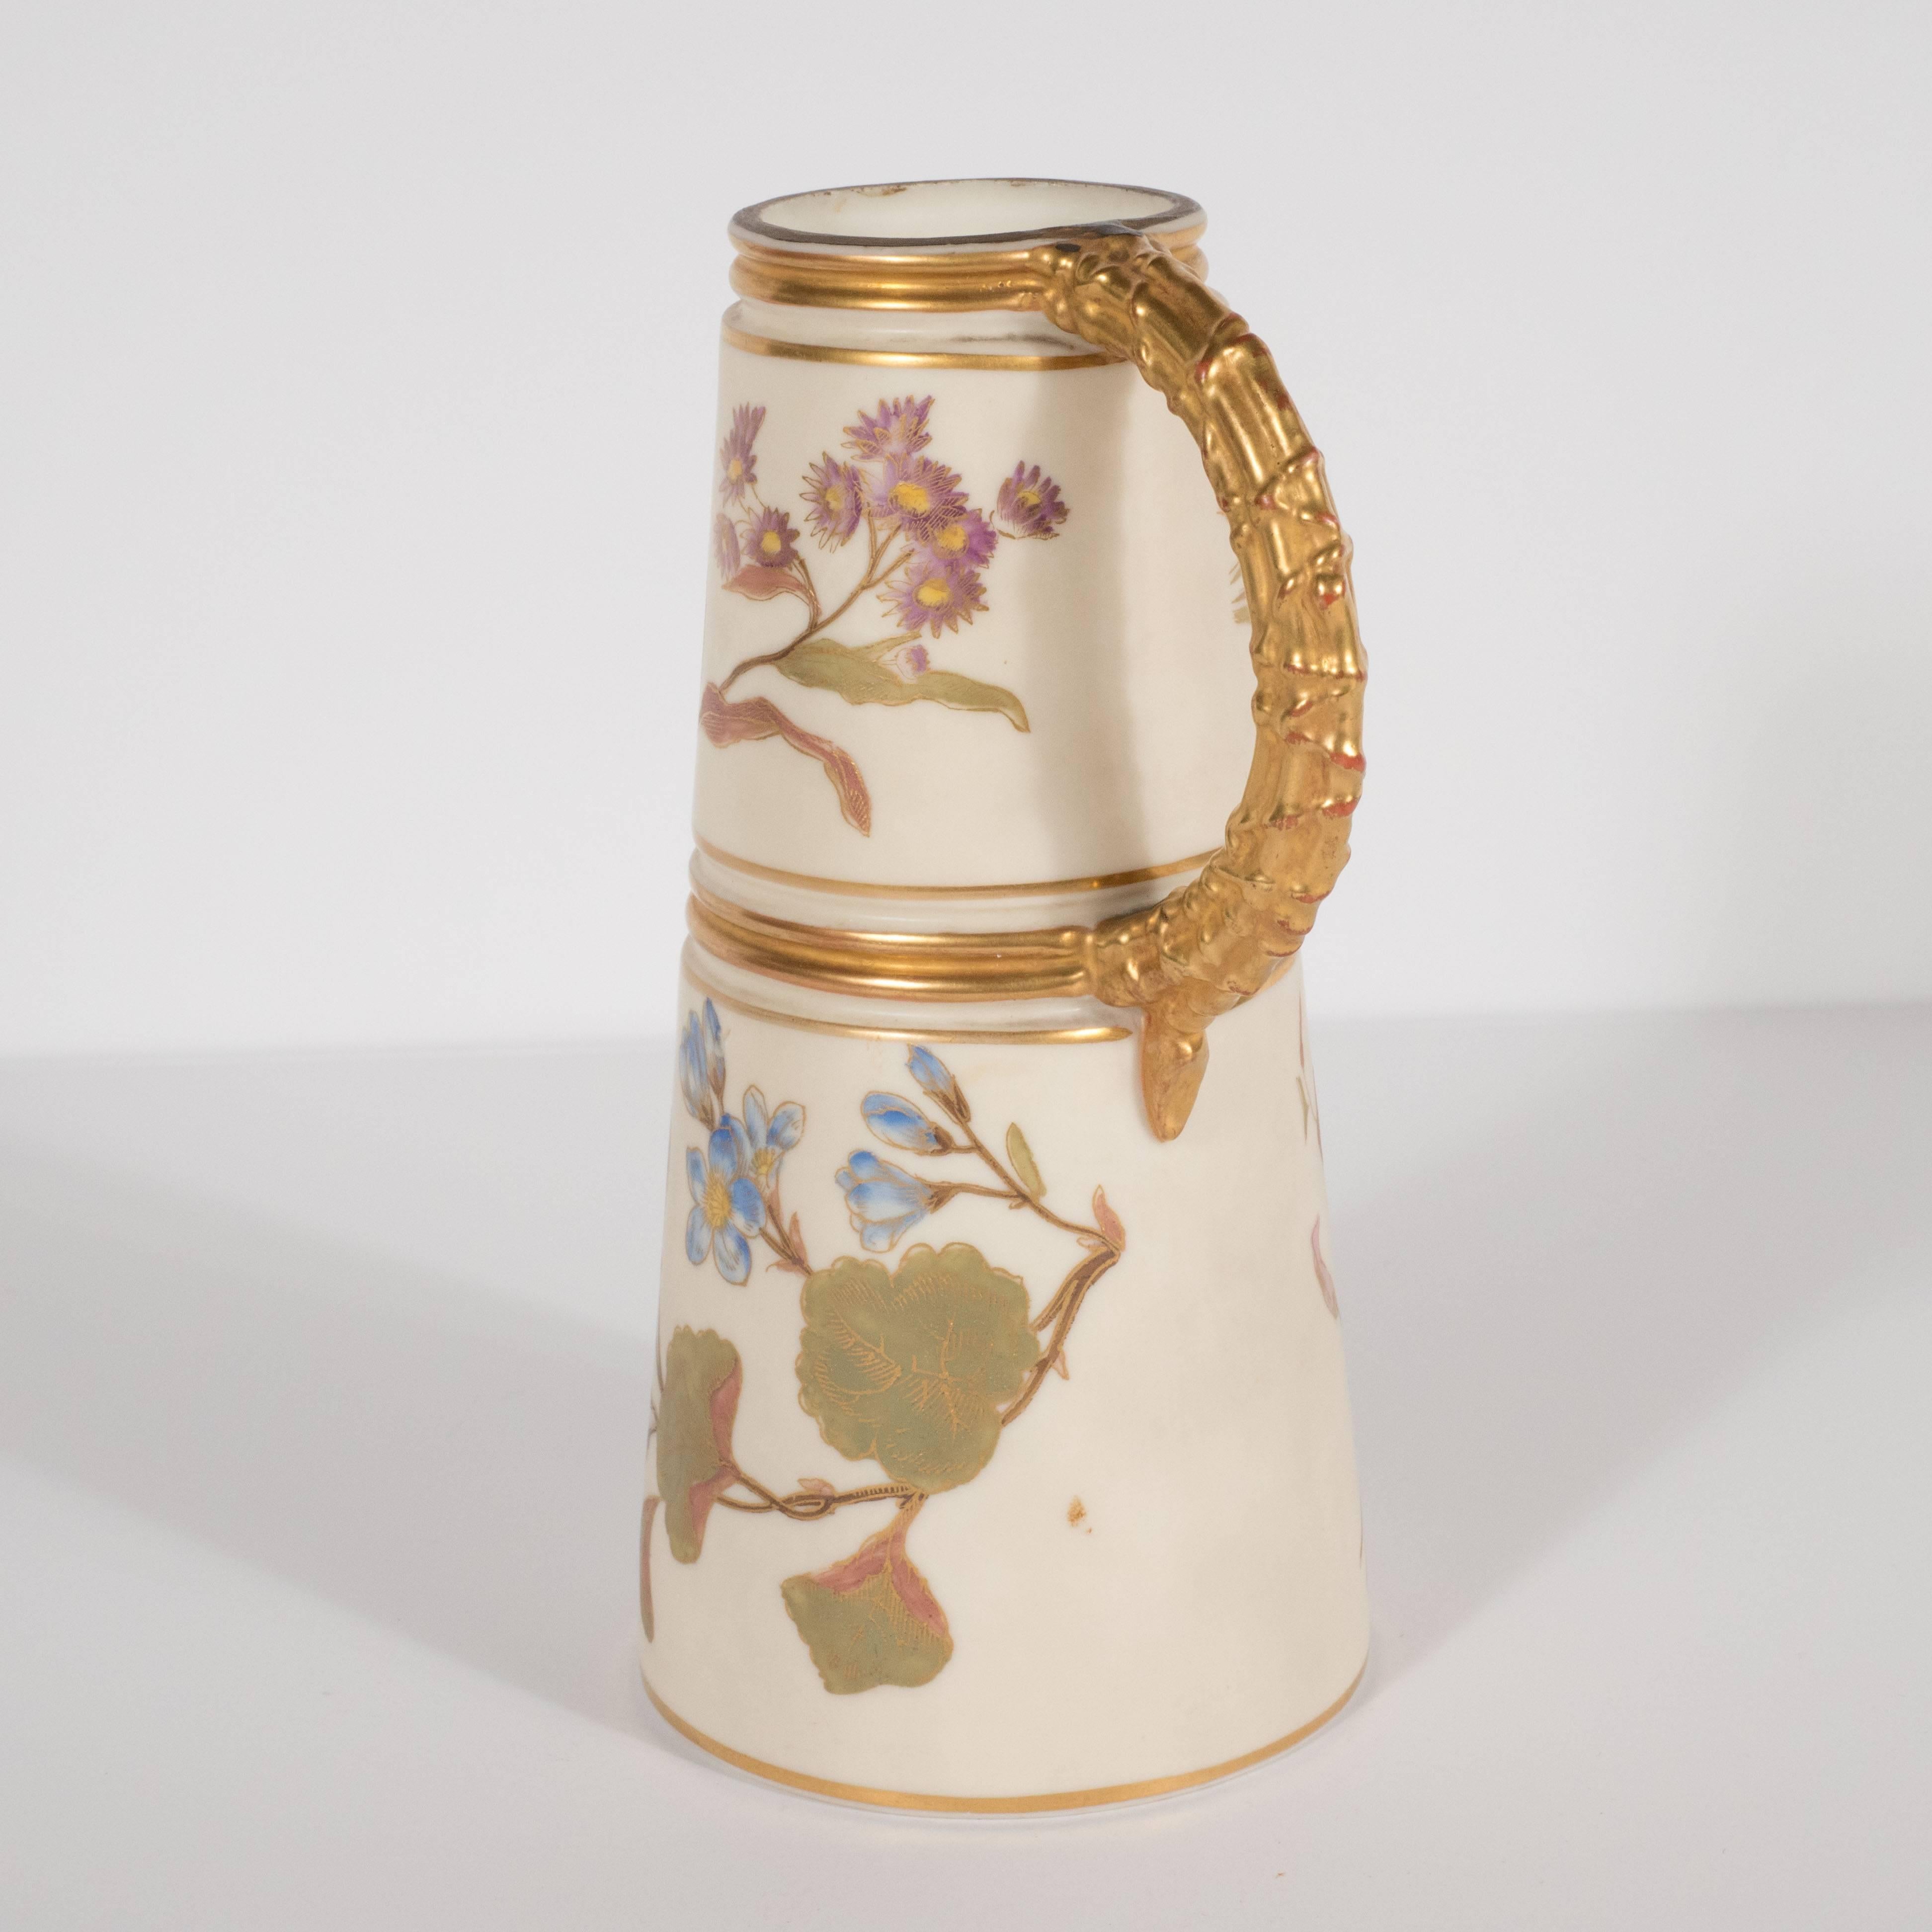 This beautiful Art Nouveau vase was created at the height of Art Nouveau by Royal Worcester- the oldest and most illustrious porcelain producer in England. It is composed of a tapered cylindrical form in bone porcelain with an abundance of